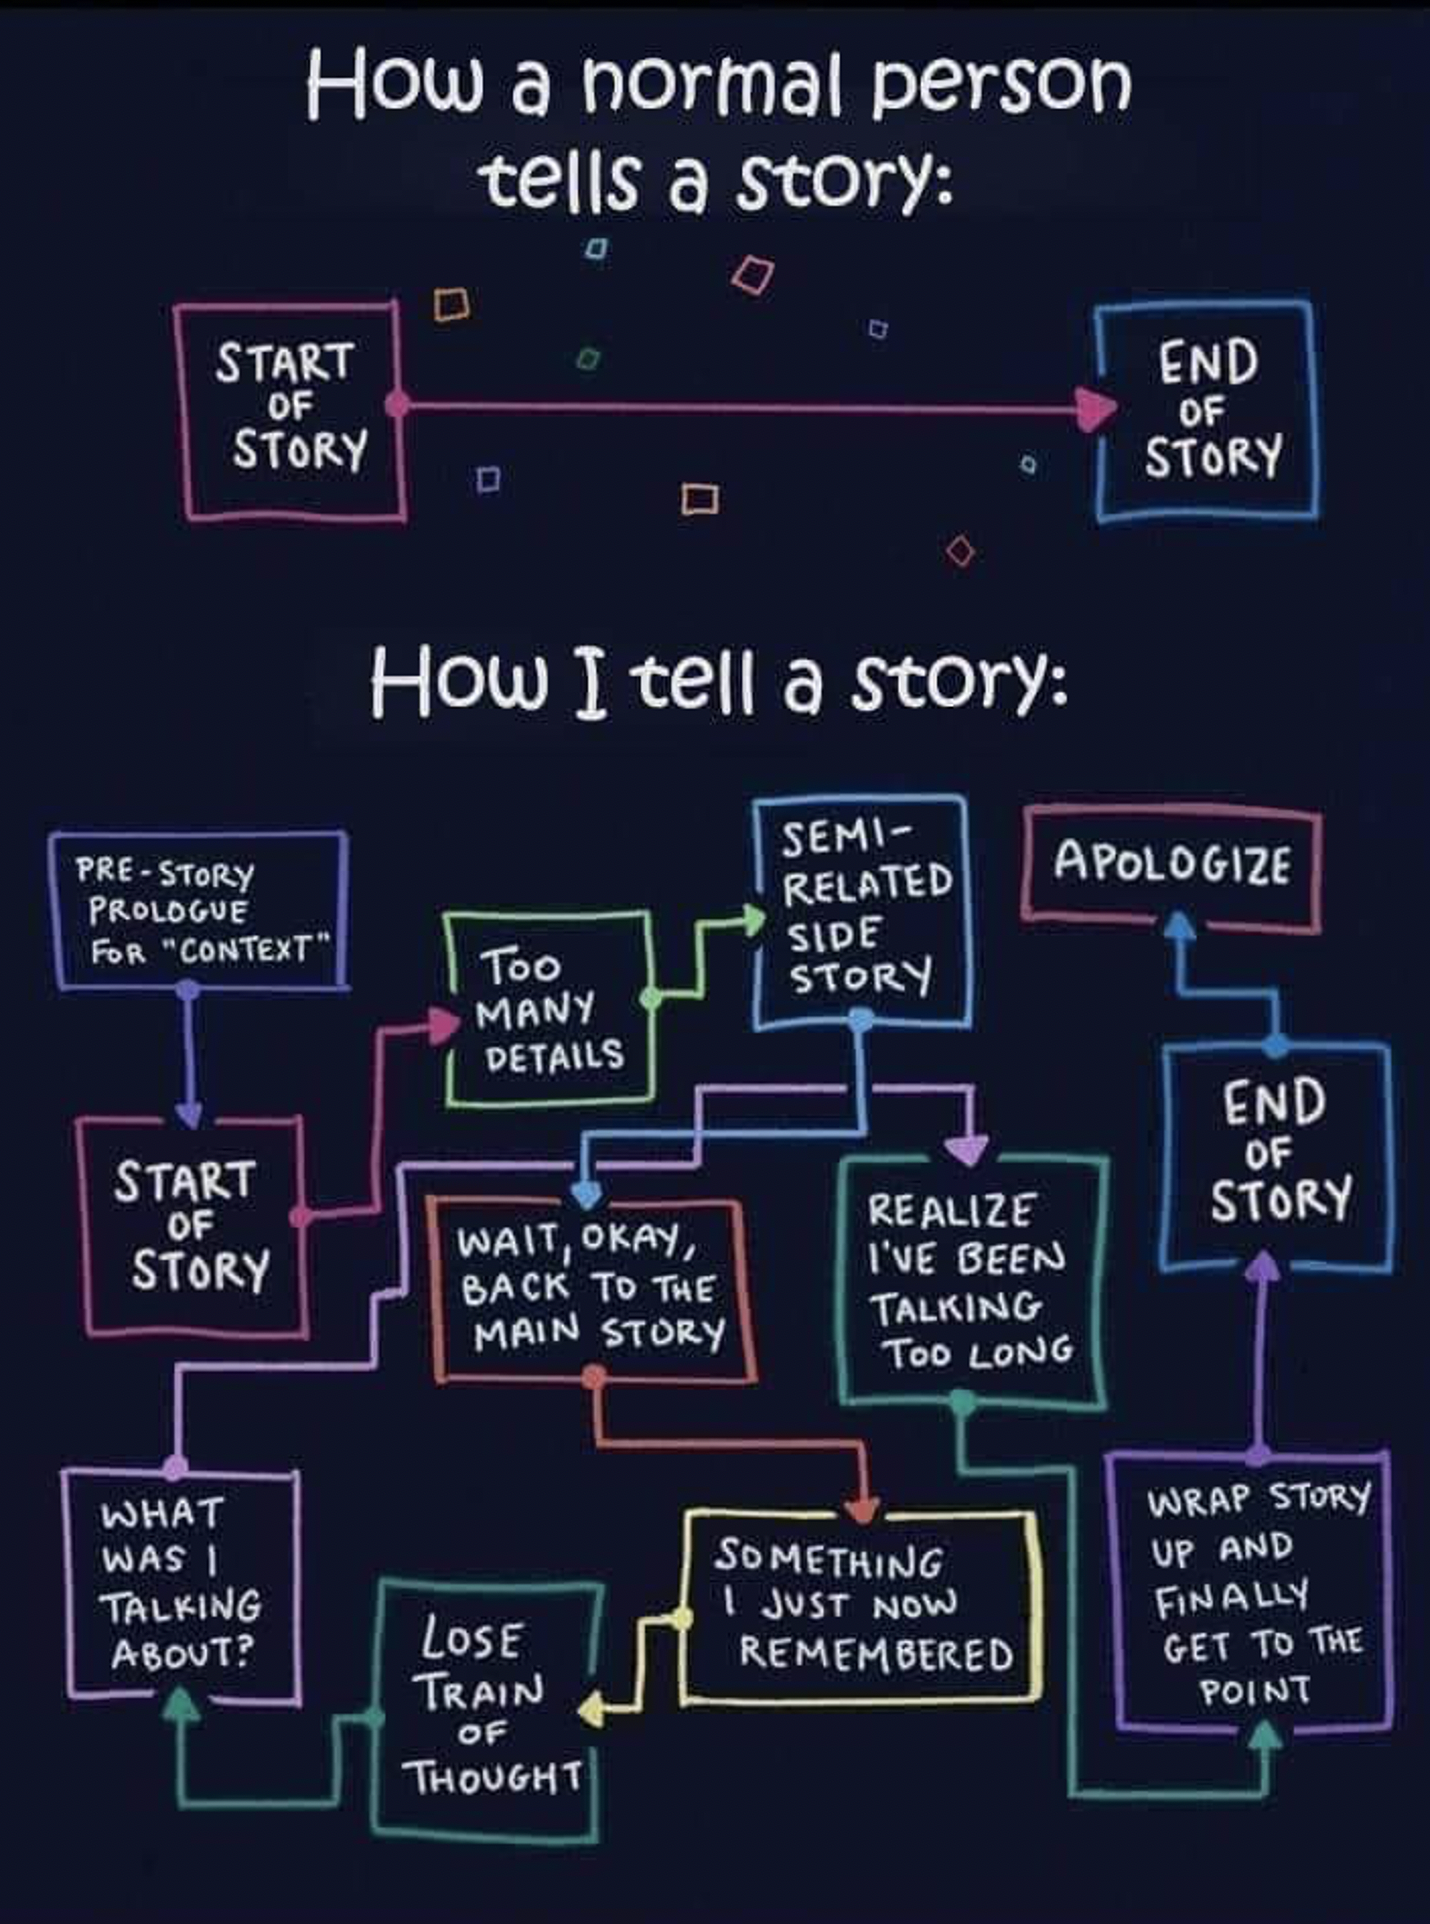 How to tell a story graphic